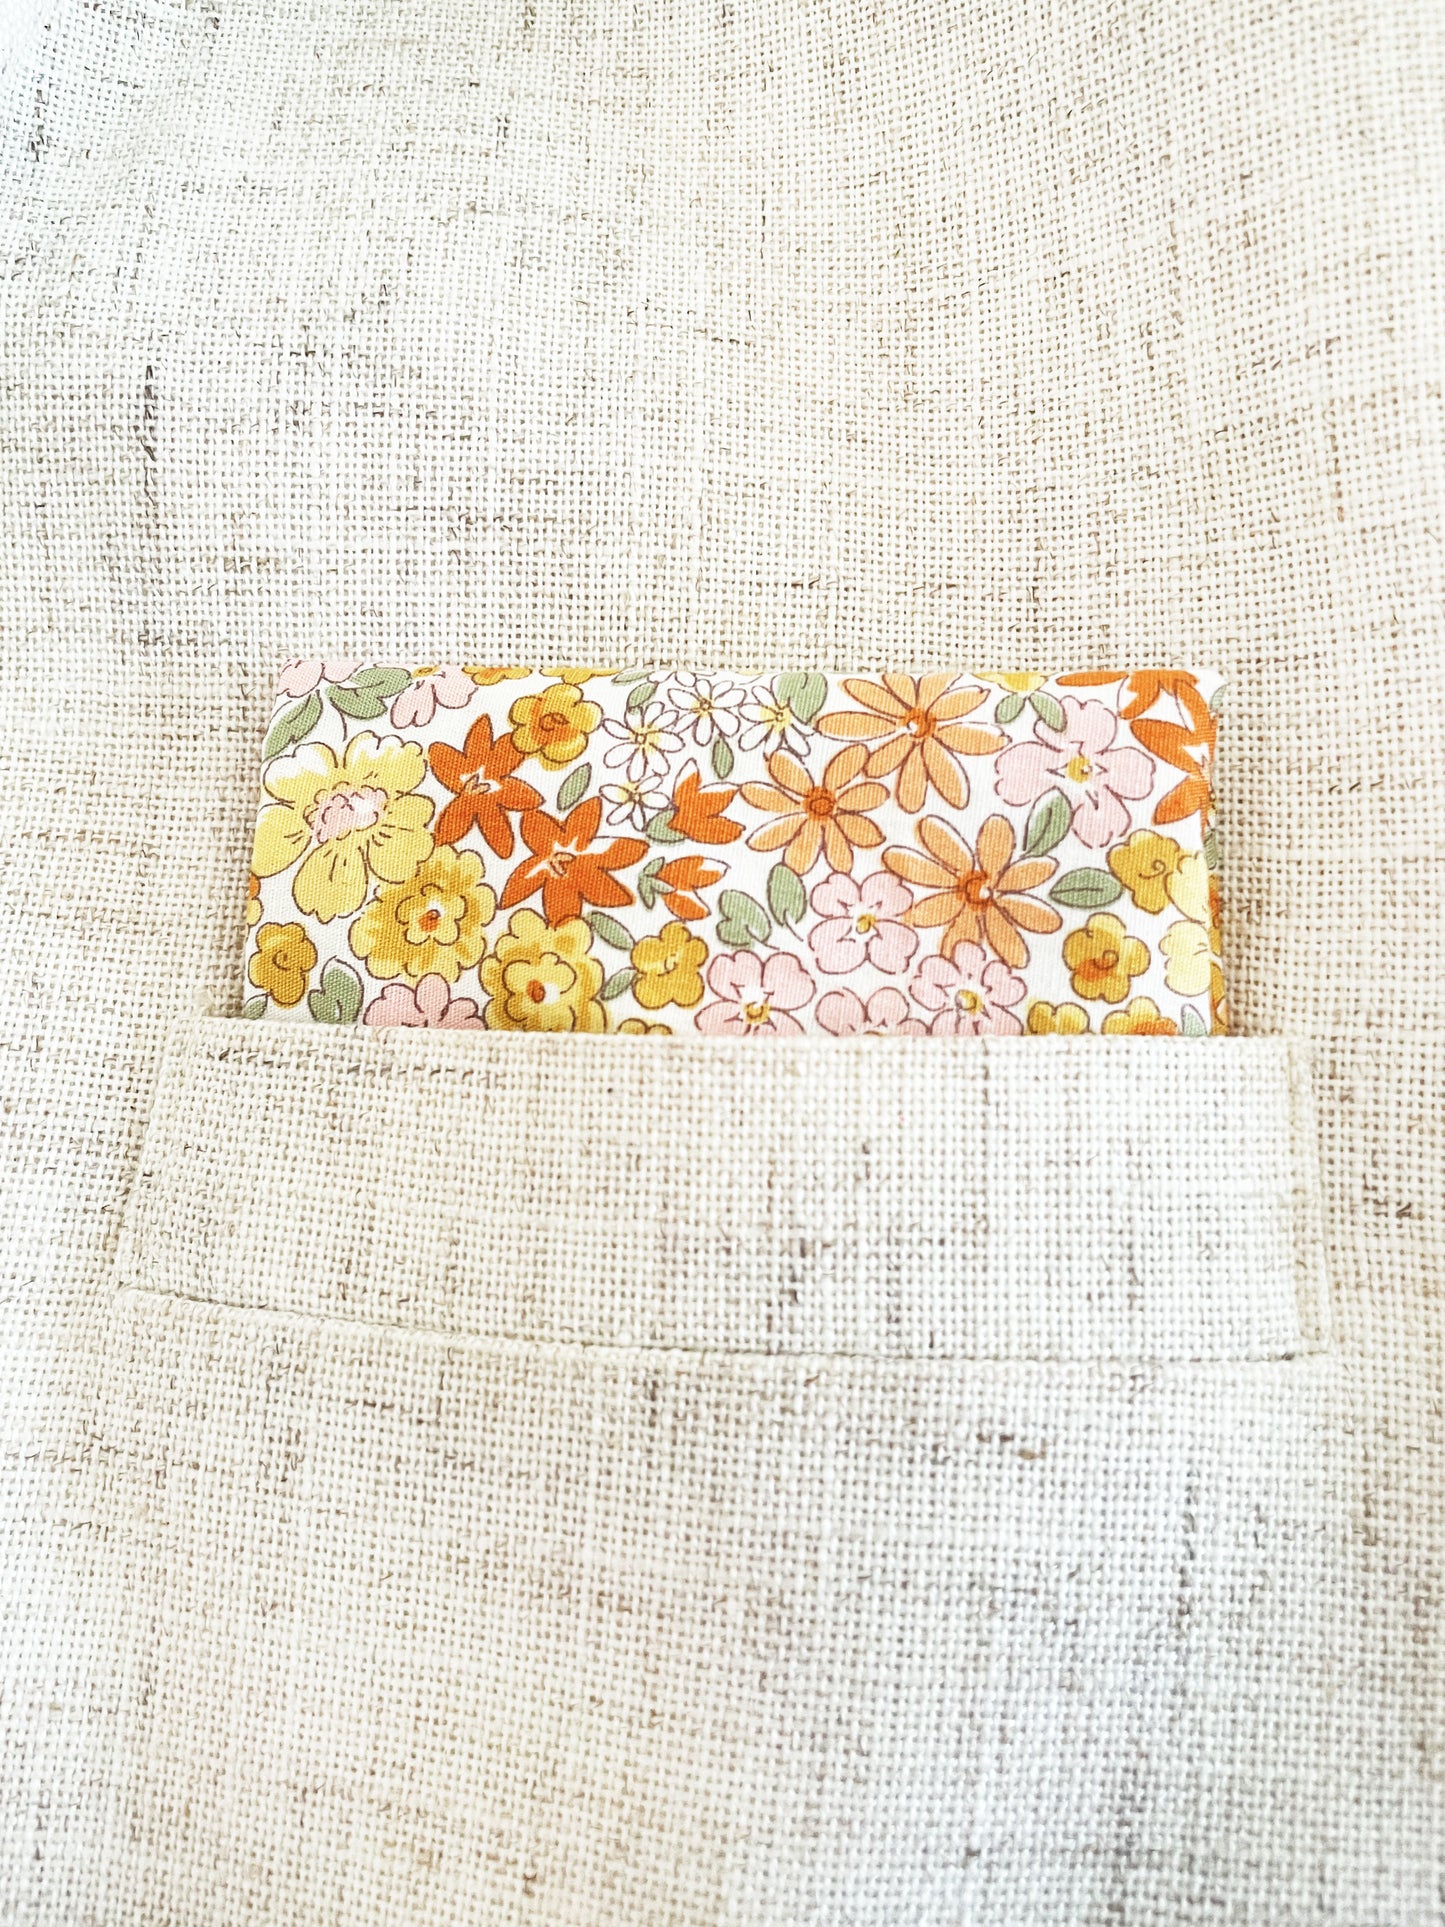 A handmade pocket square with yellow flowers against an off white background.